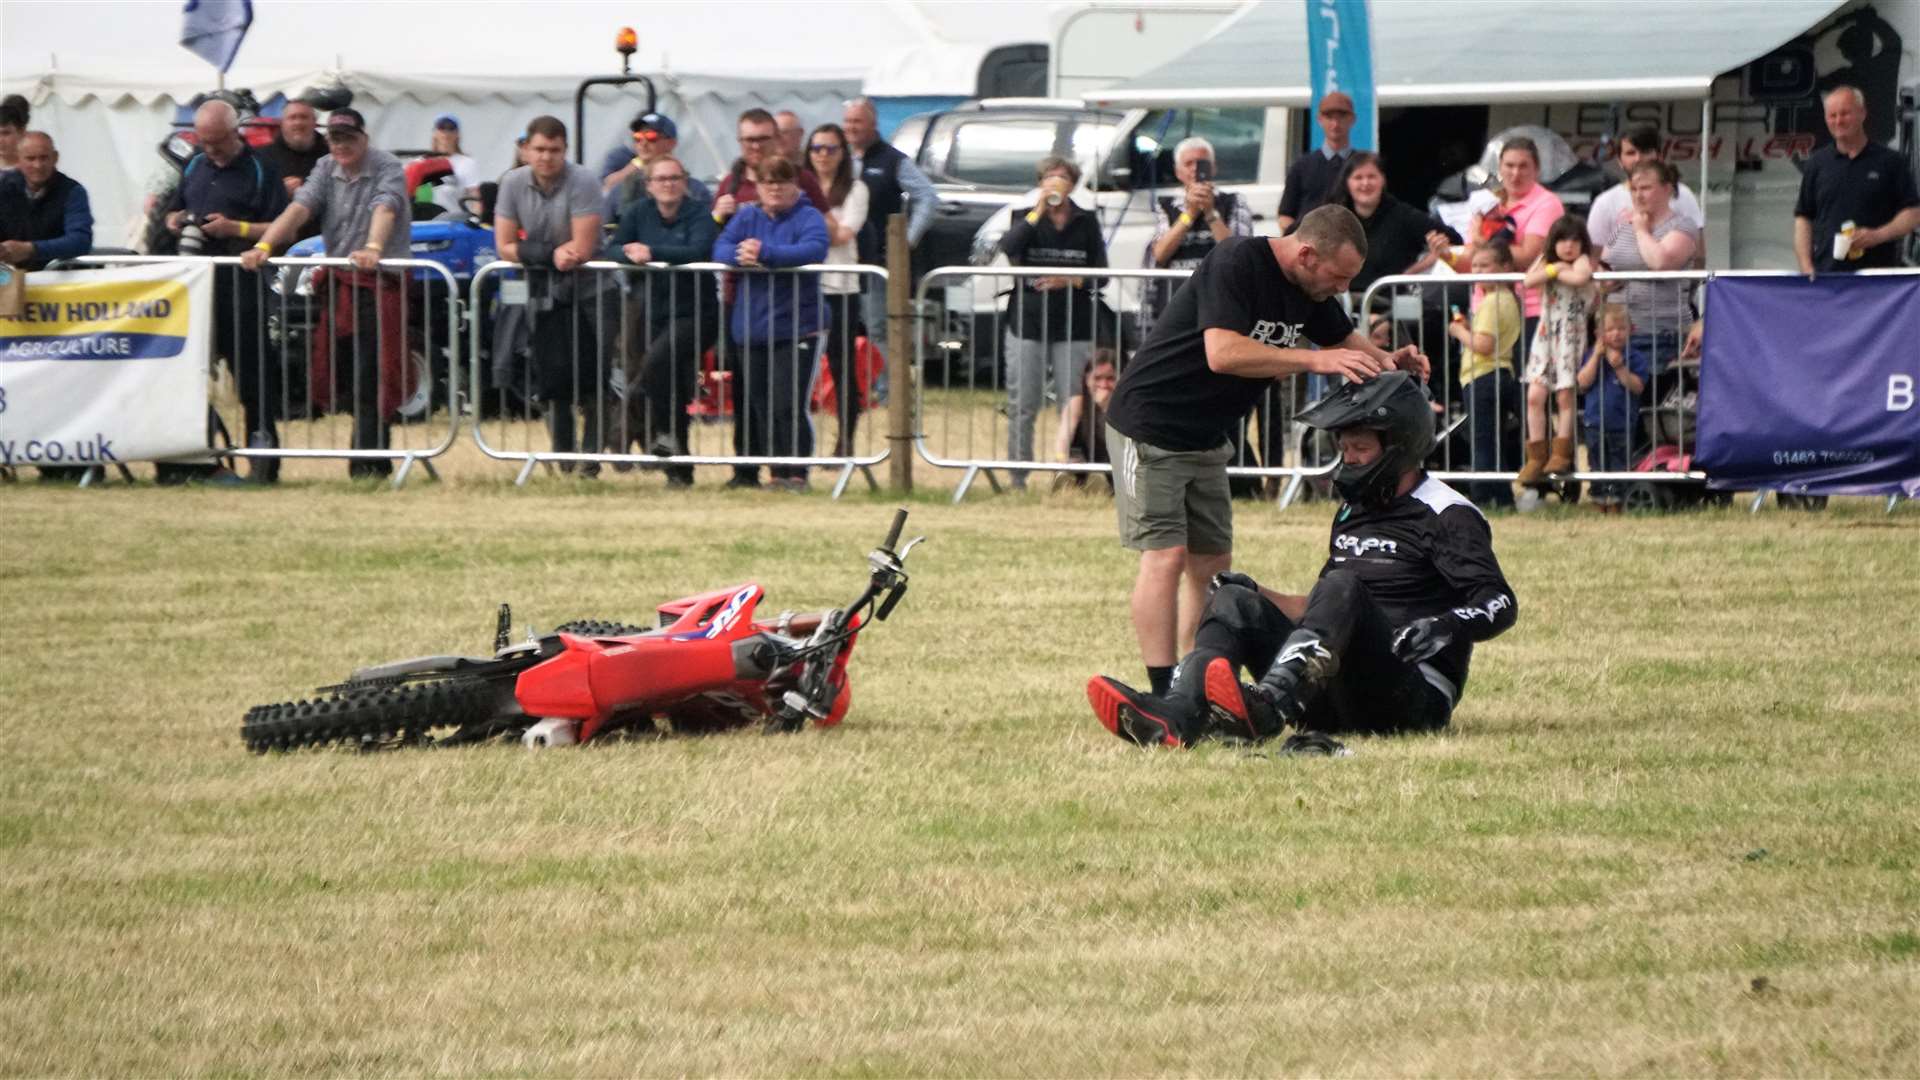 The Broke FMX safety manager, James, helps him to his feet. Picture: DGS